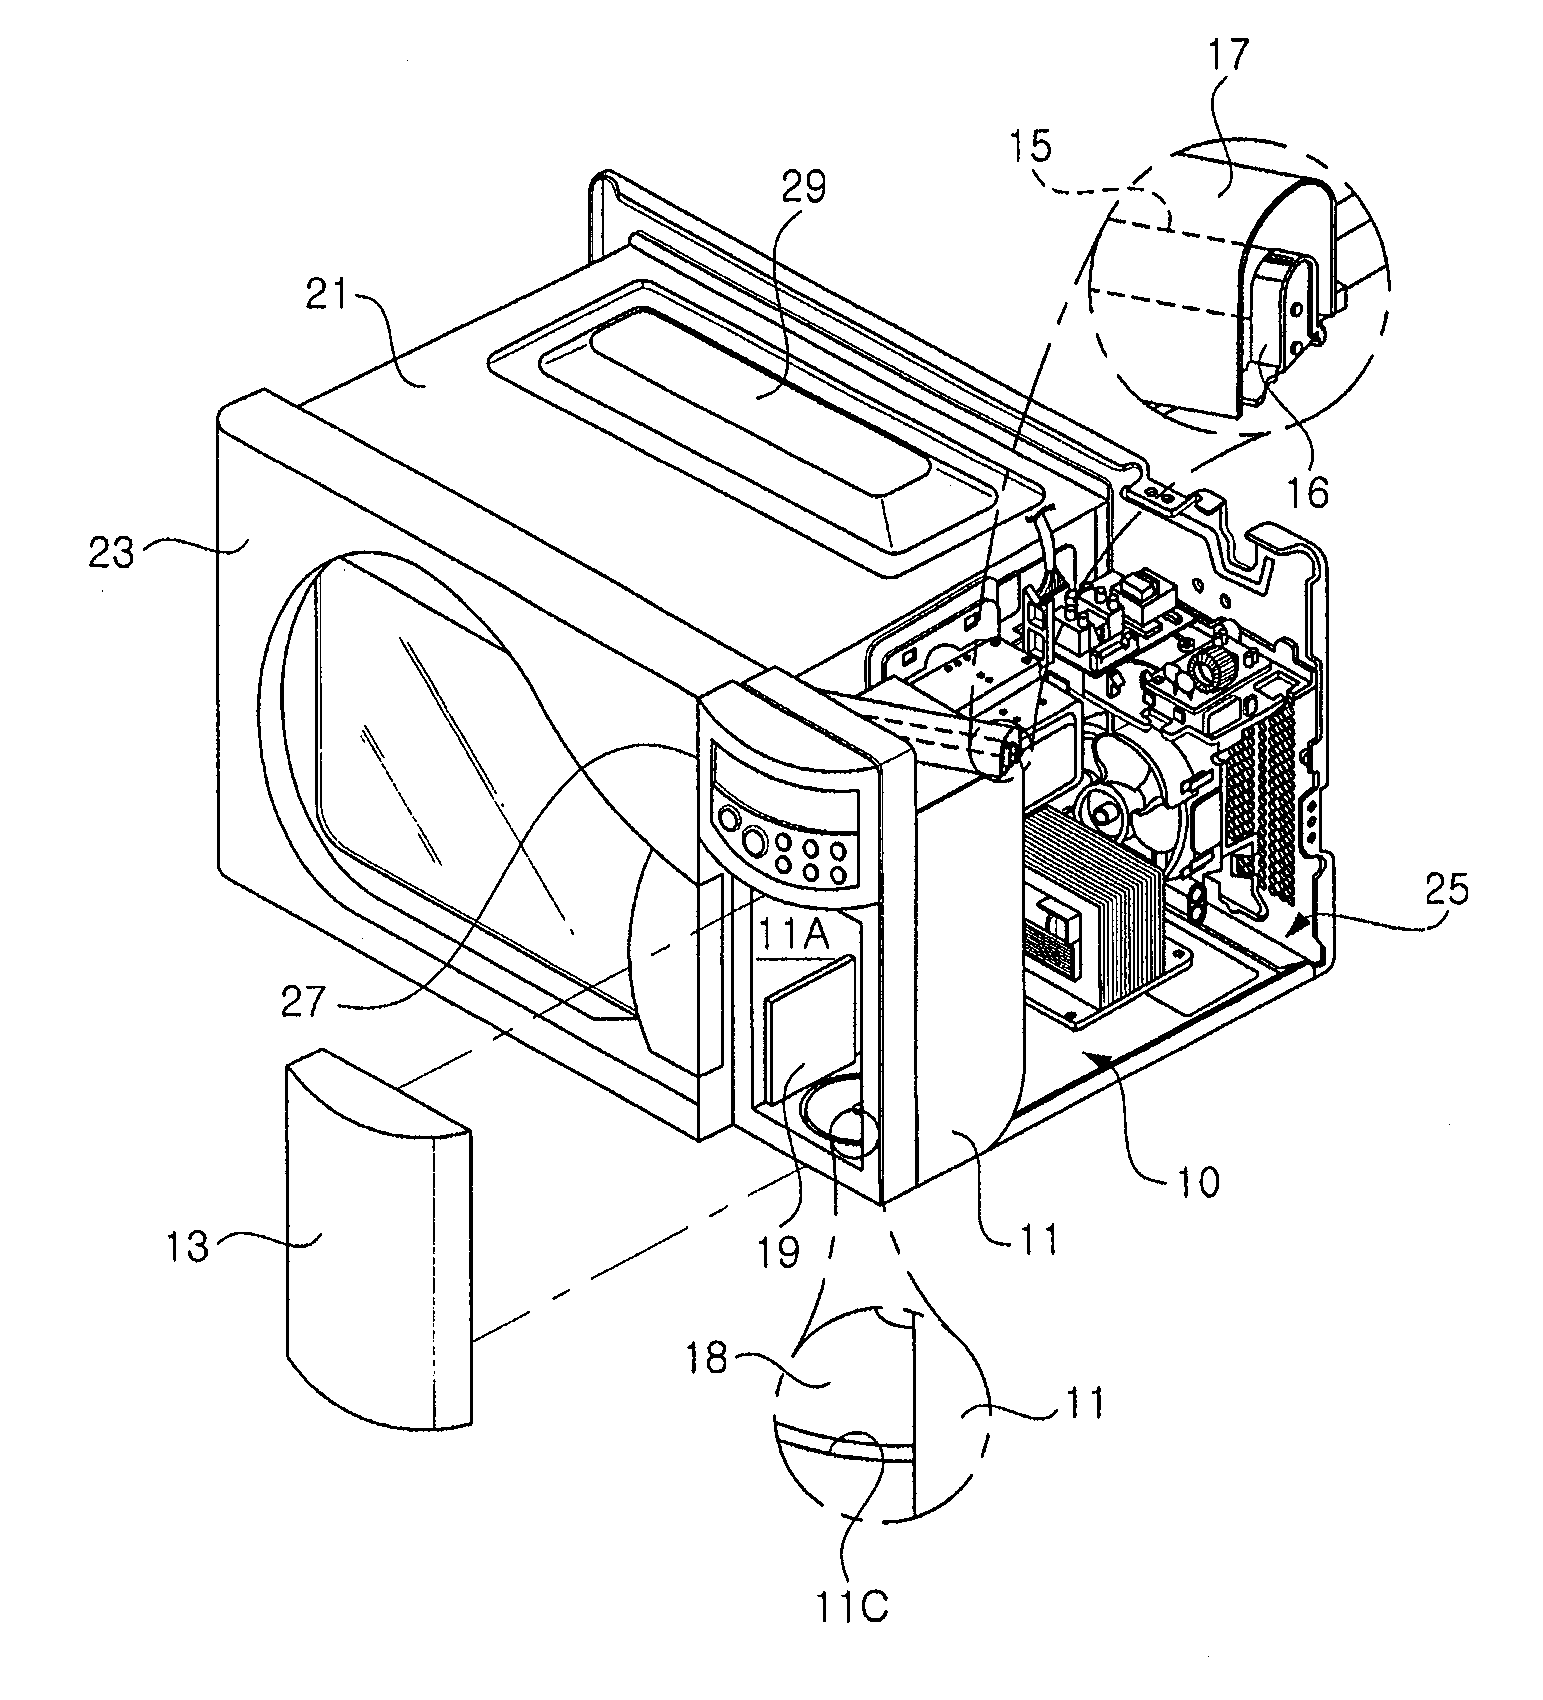 Sterilizing Device With Ultraviolet Ray And Microwave Oven Having The Same